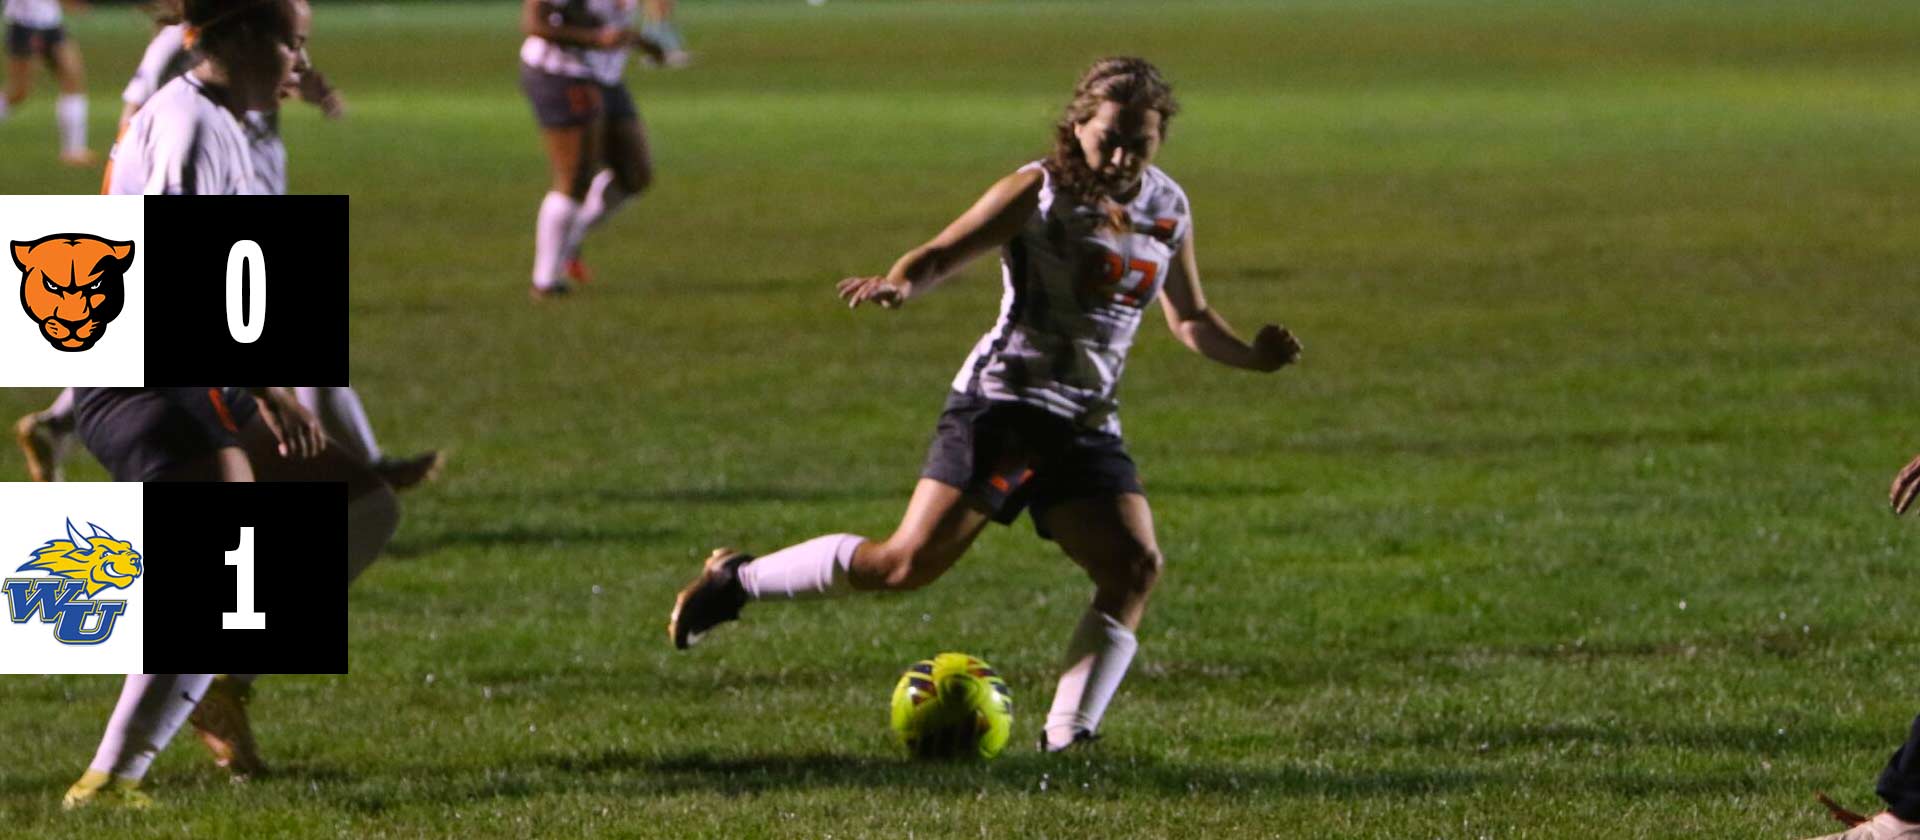 Women's soccer defeated by Webster 1-0 in Homecoming match